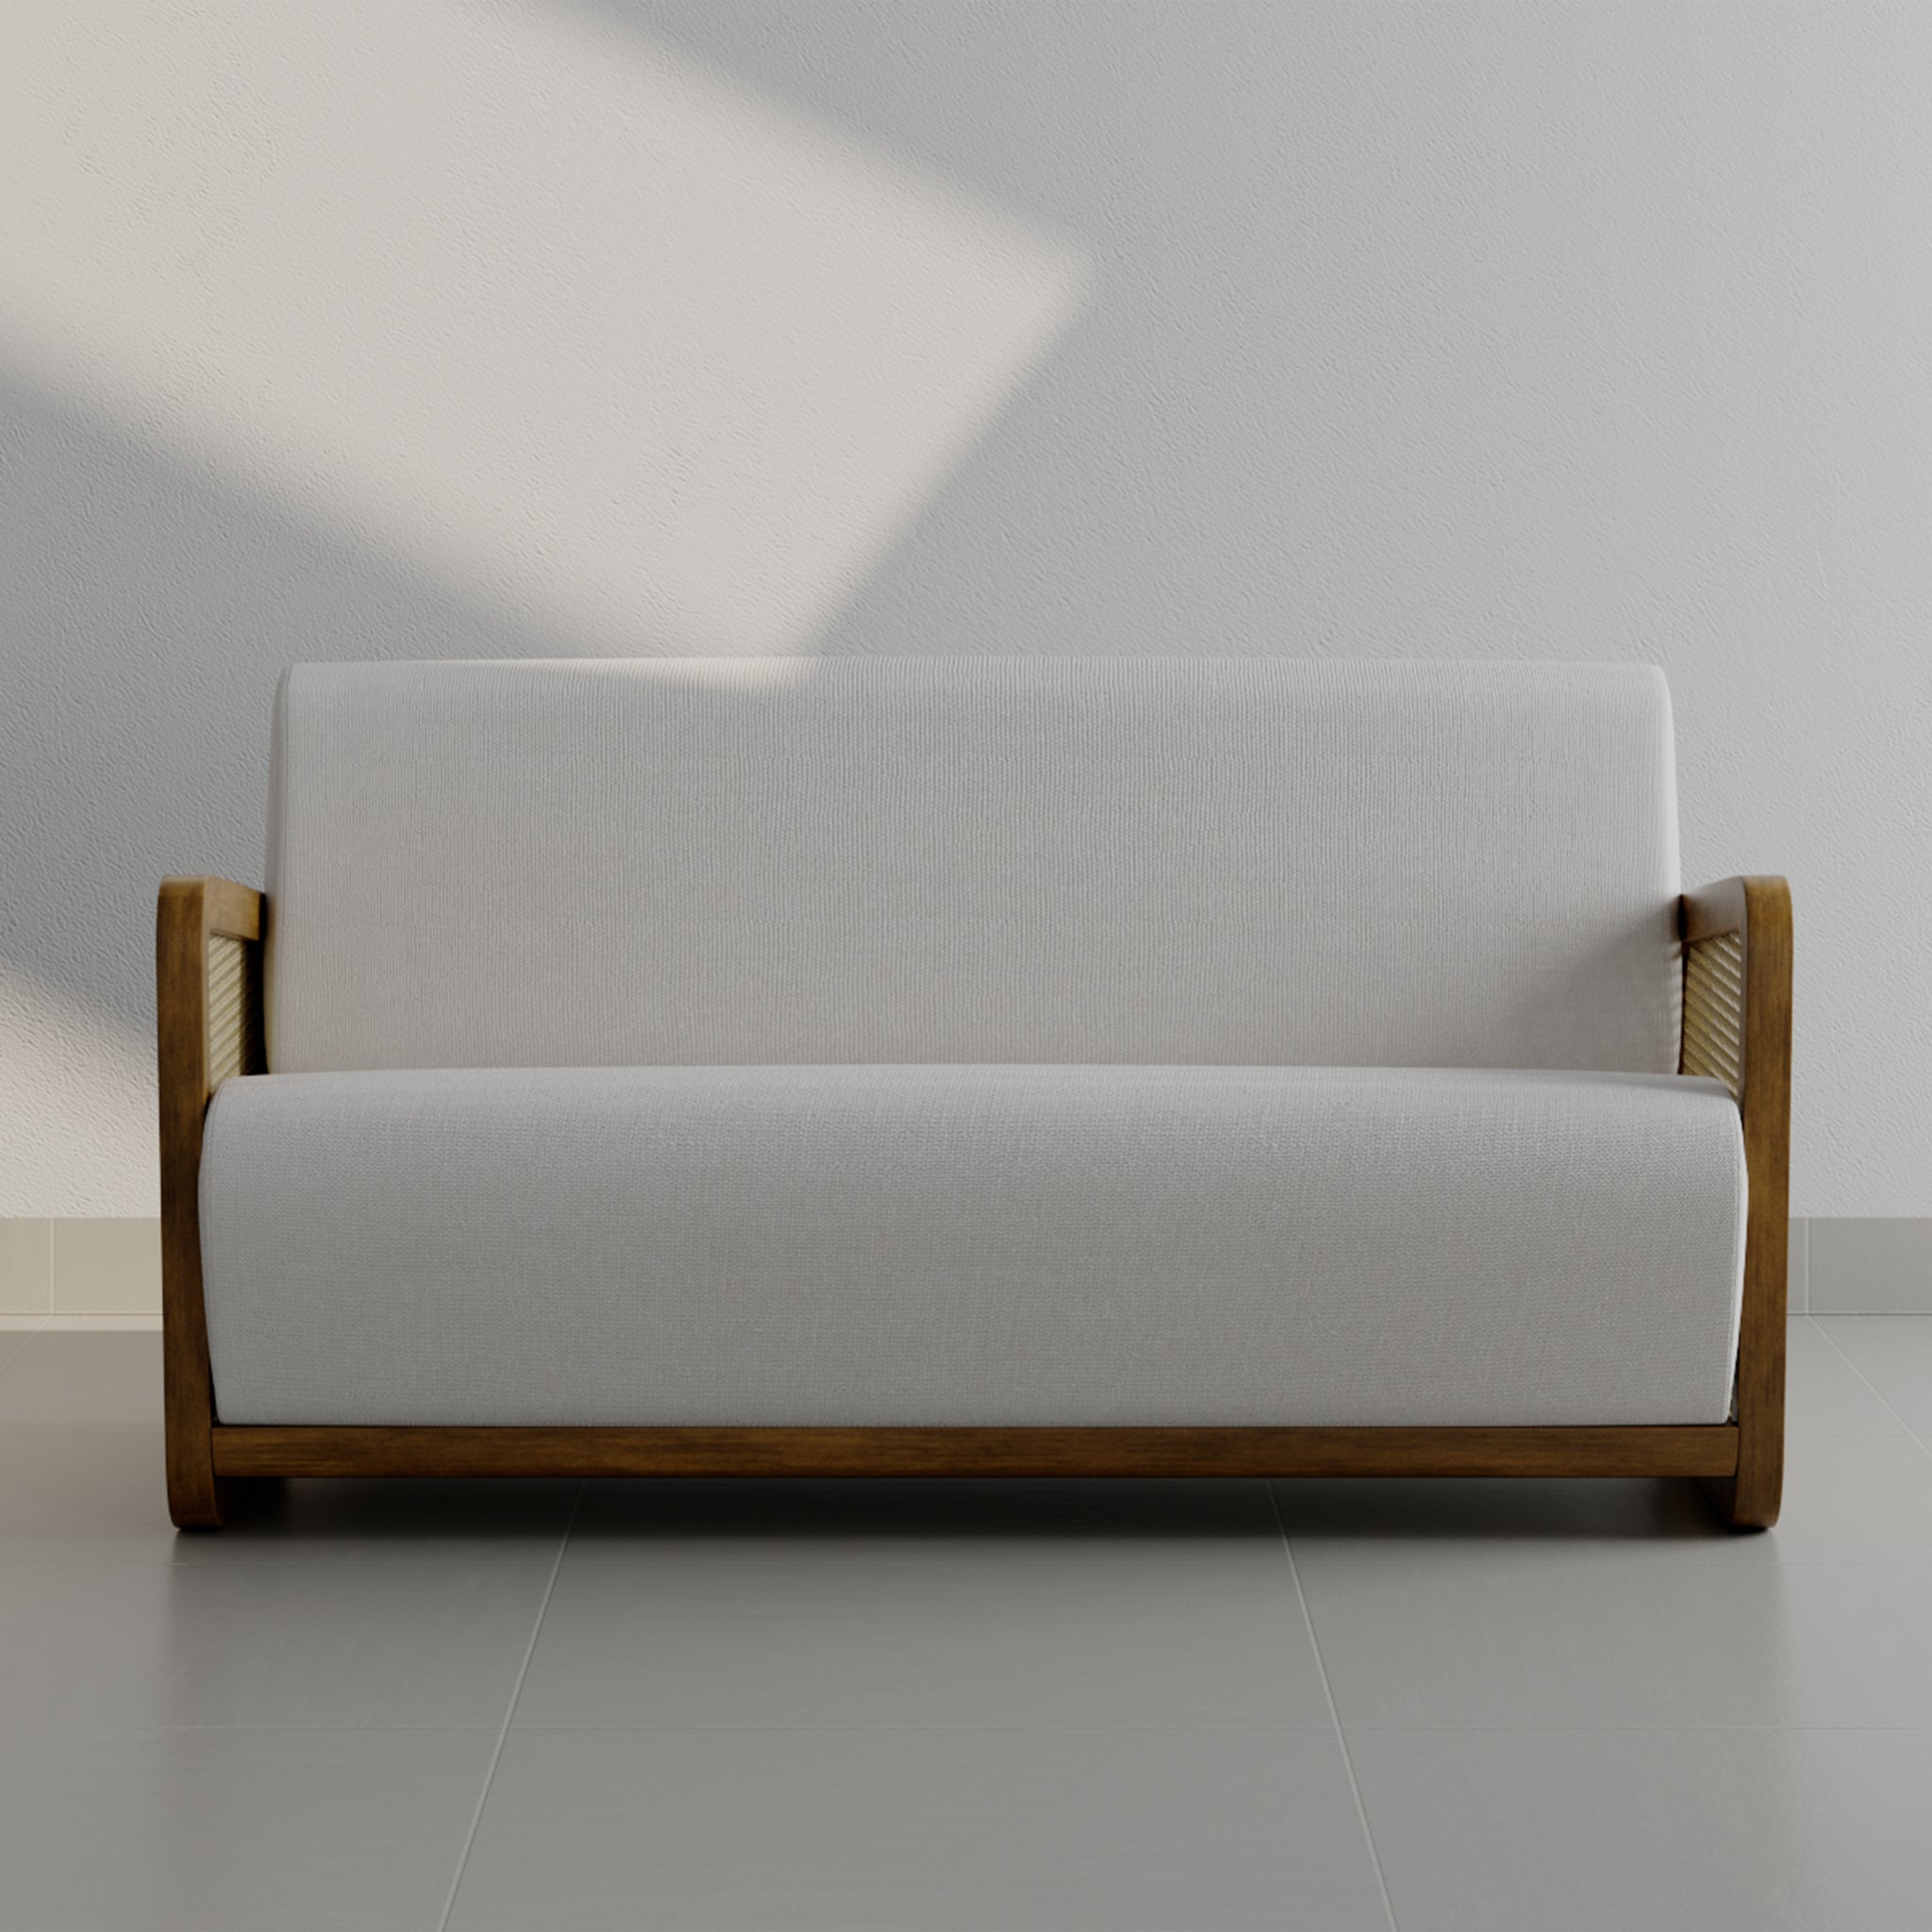 "The Georgia Accent Chair with a minimalist design, showcasing its wooden frame and beige fabric."